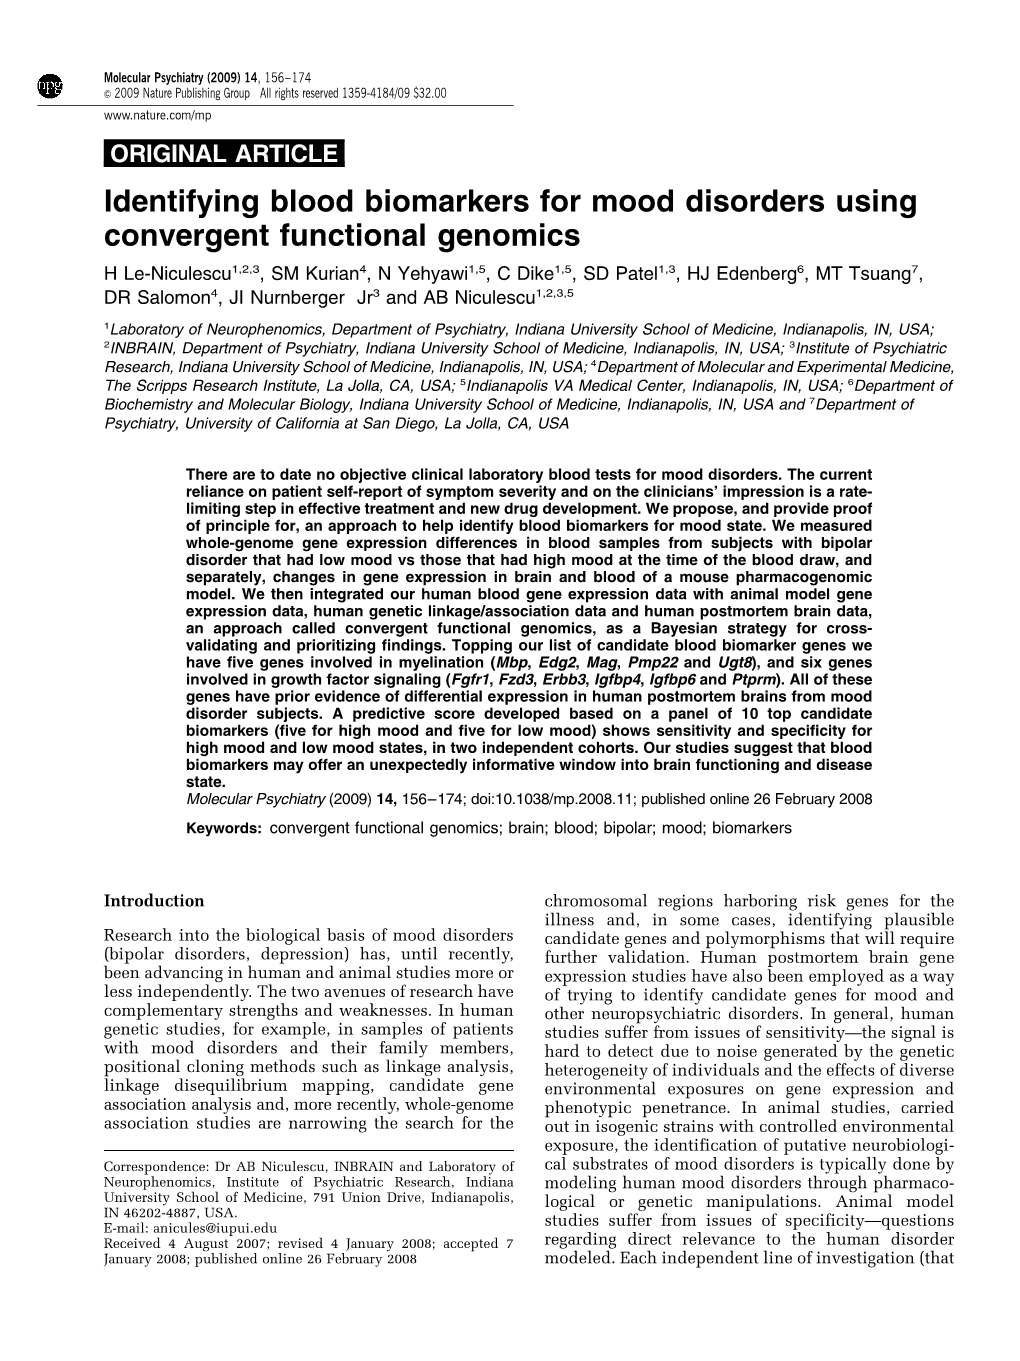 Identifying Blood Biomarkers for Mood Disorders Using Convergent